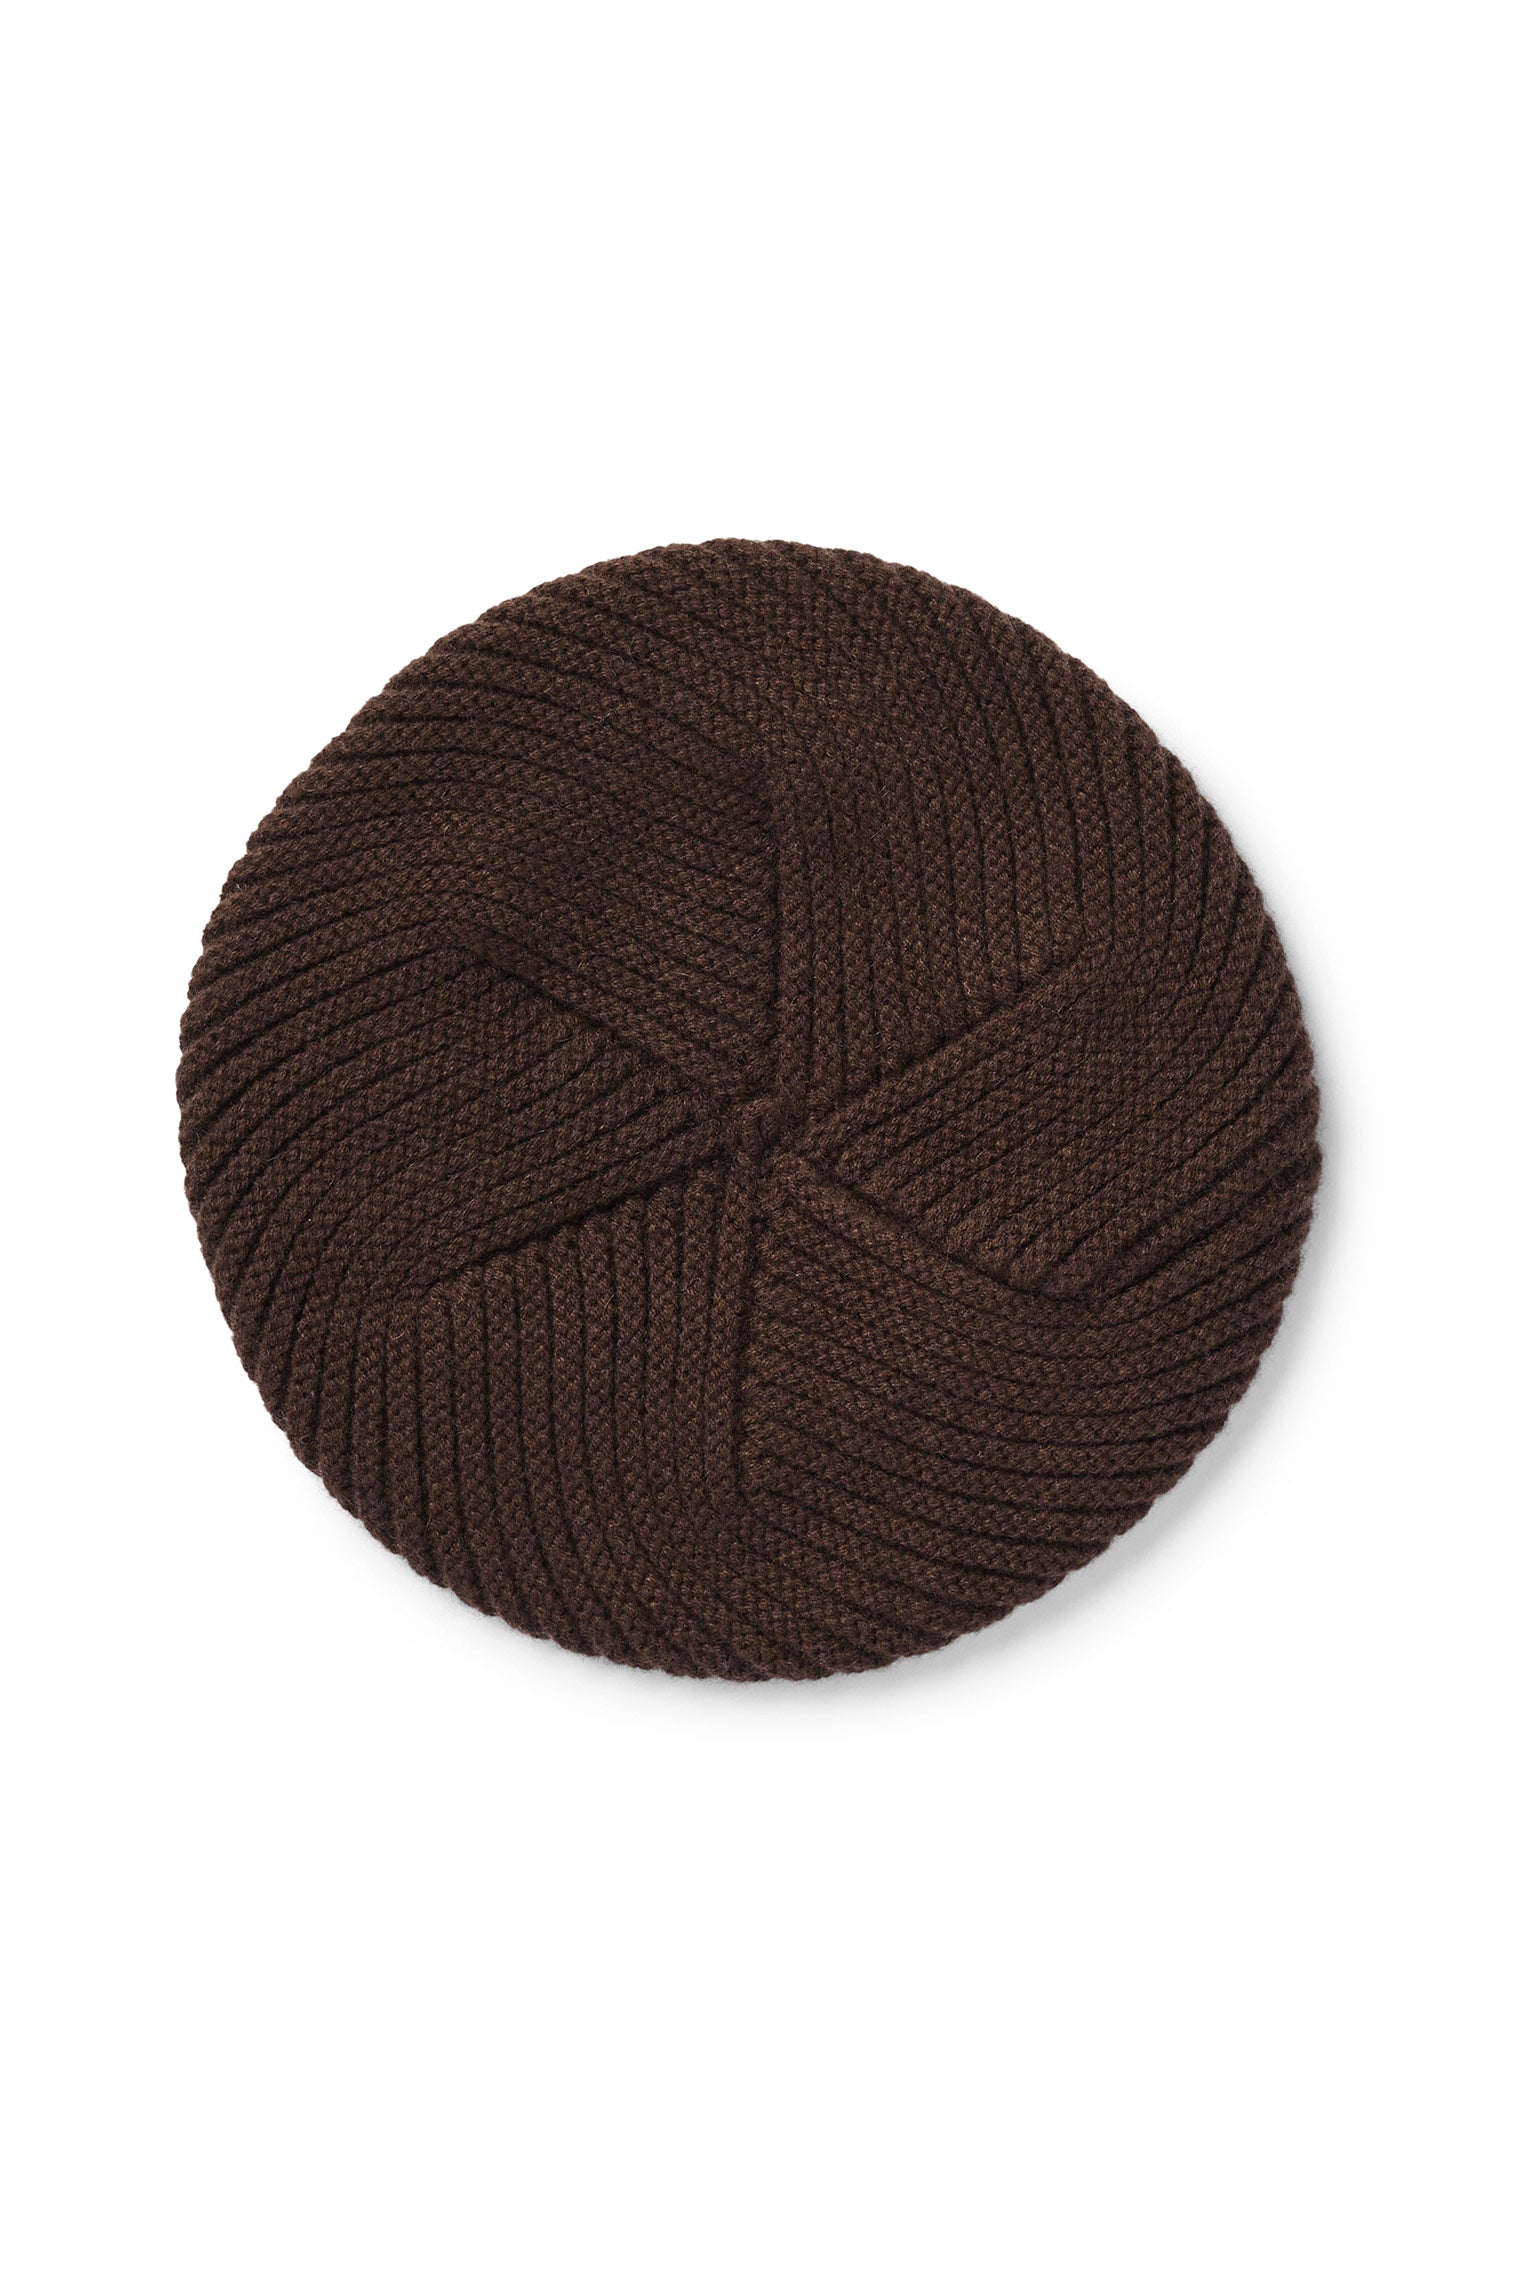 Brown Knitted Cashmere Beret - Berets - Lock & Co. Hatters London UK